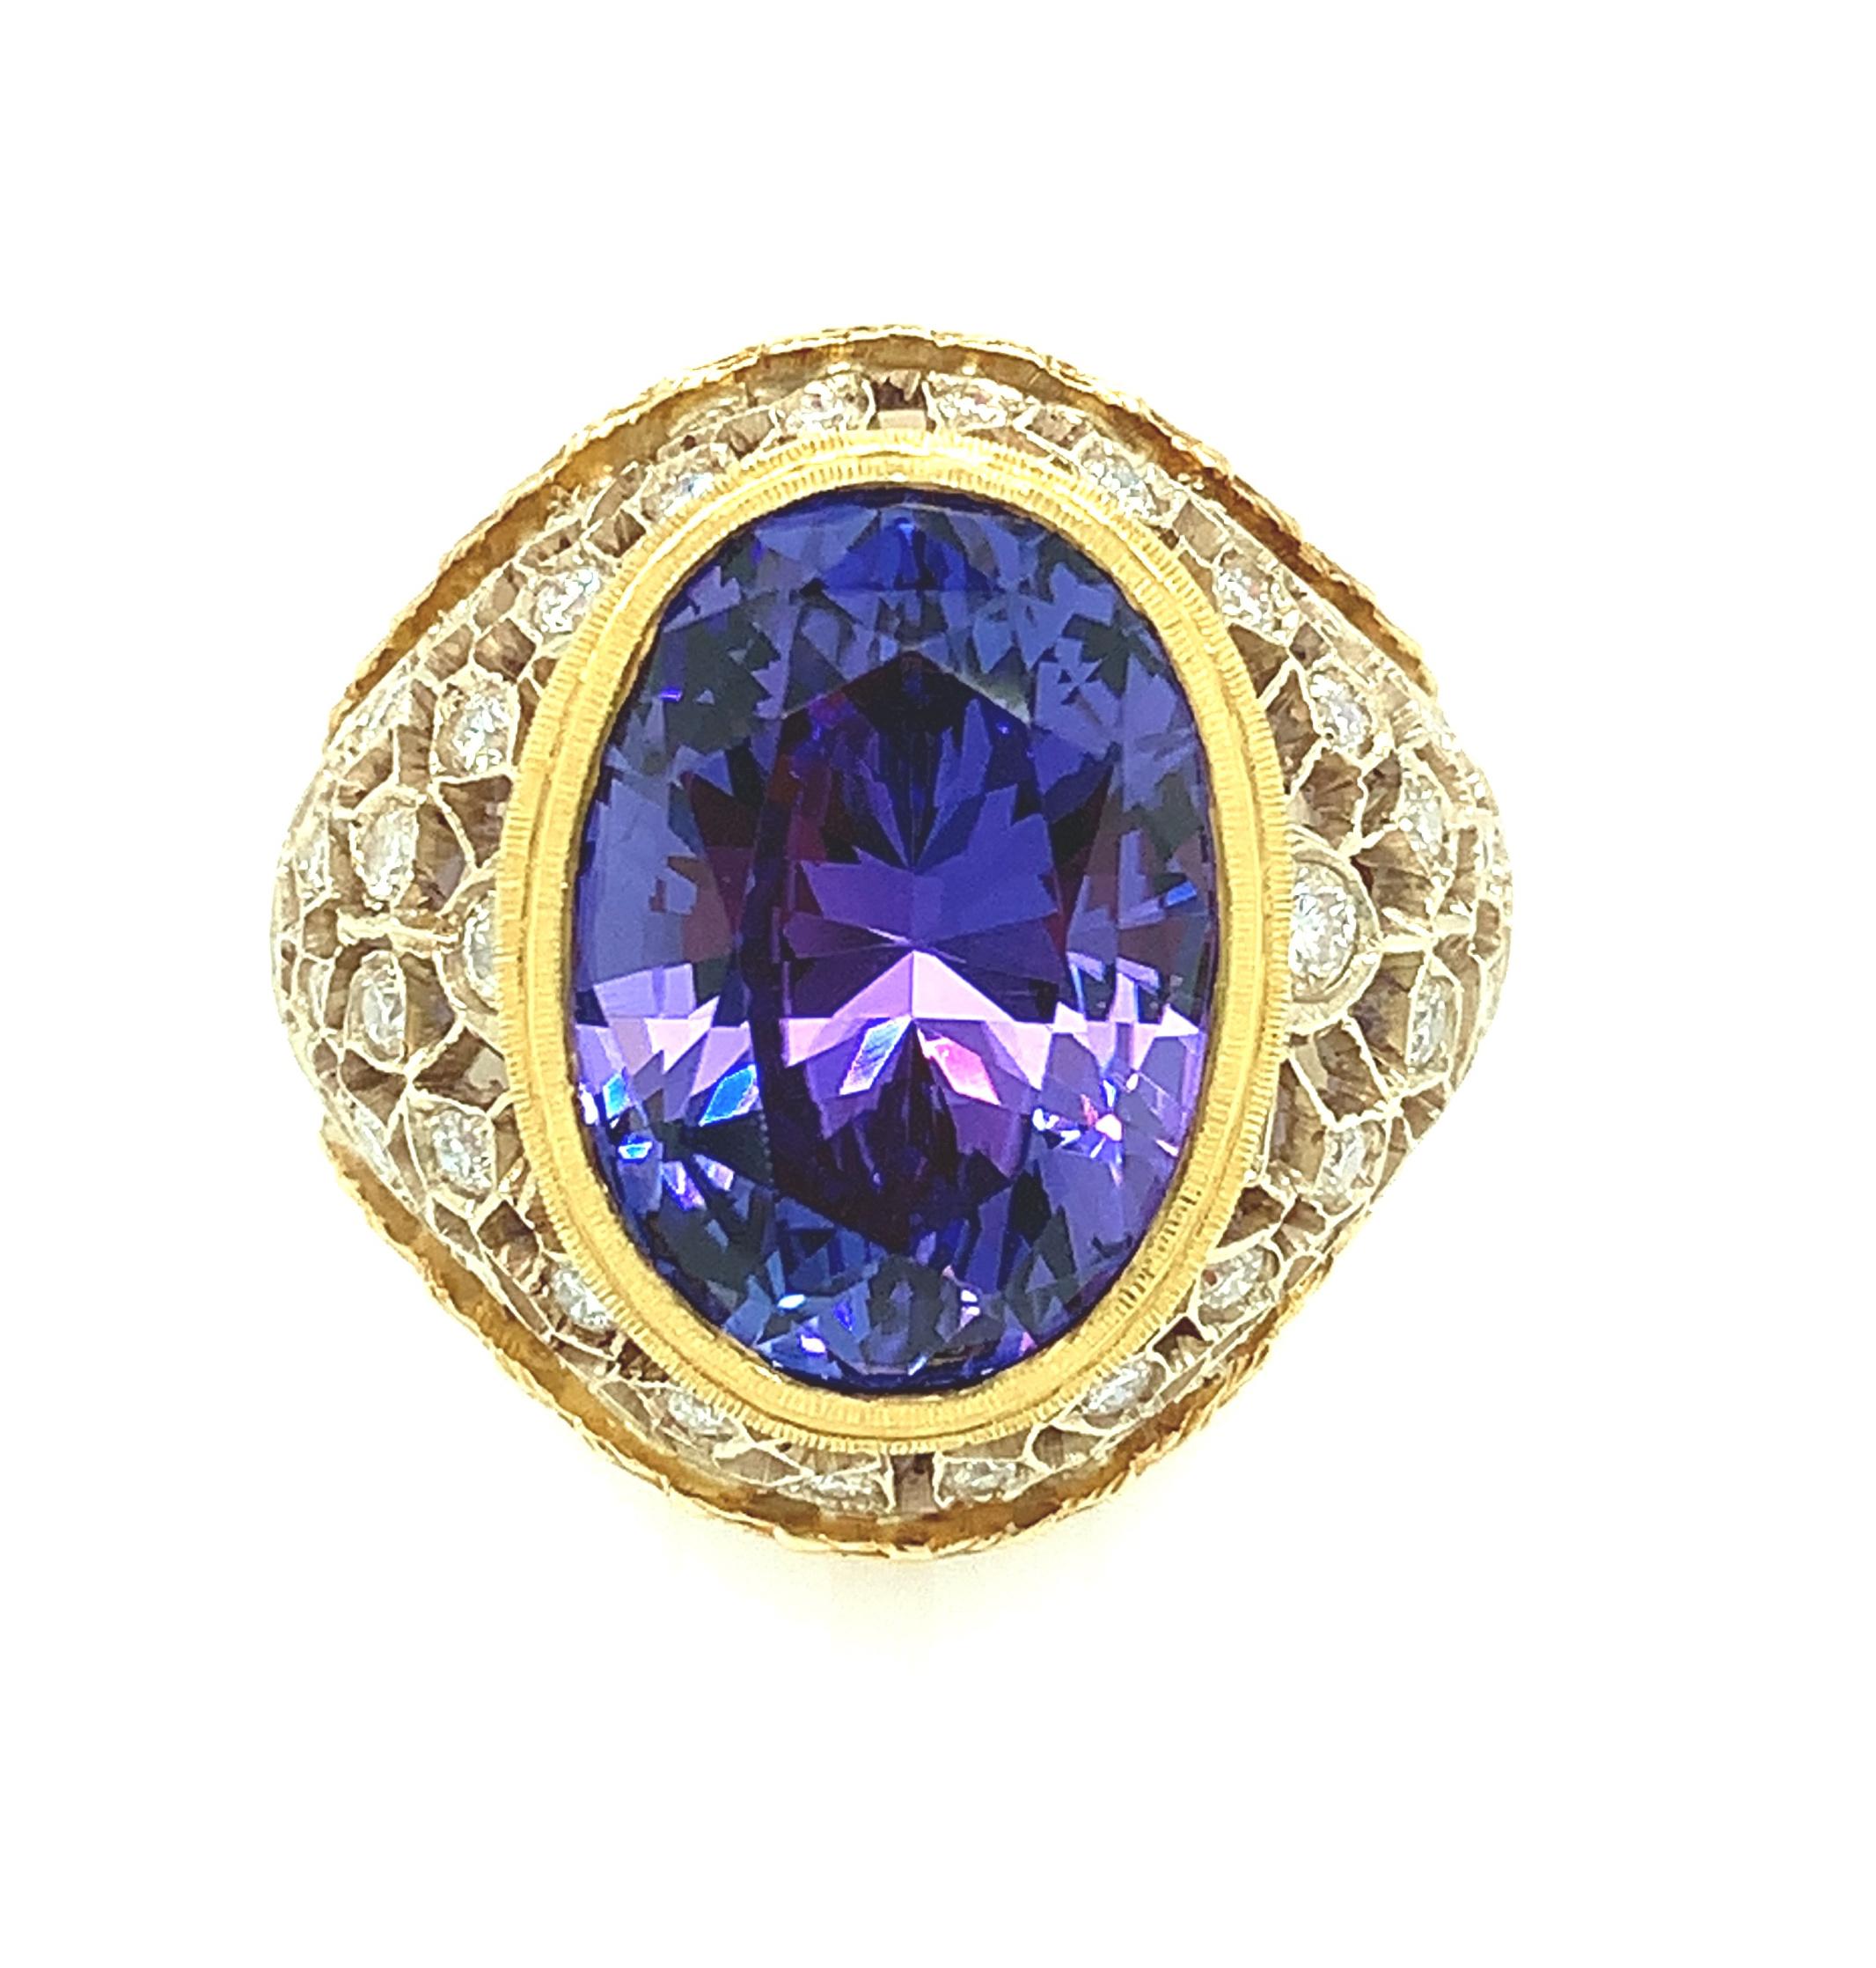 A deep, periwinkle blue tanzanite weighing 8.25 carats is featured in this beautiful Florentine inspired ring set with round brilliant cut diamonds. The intricately pierced and engraved details of this ring display the skills required to create such